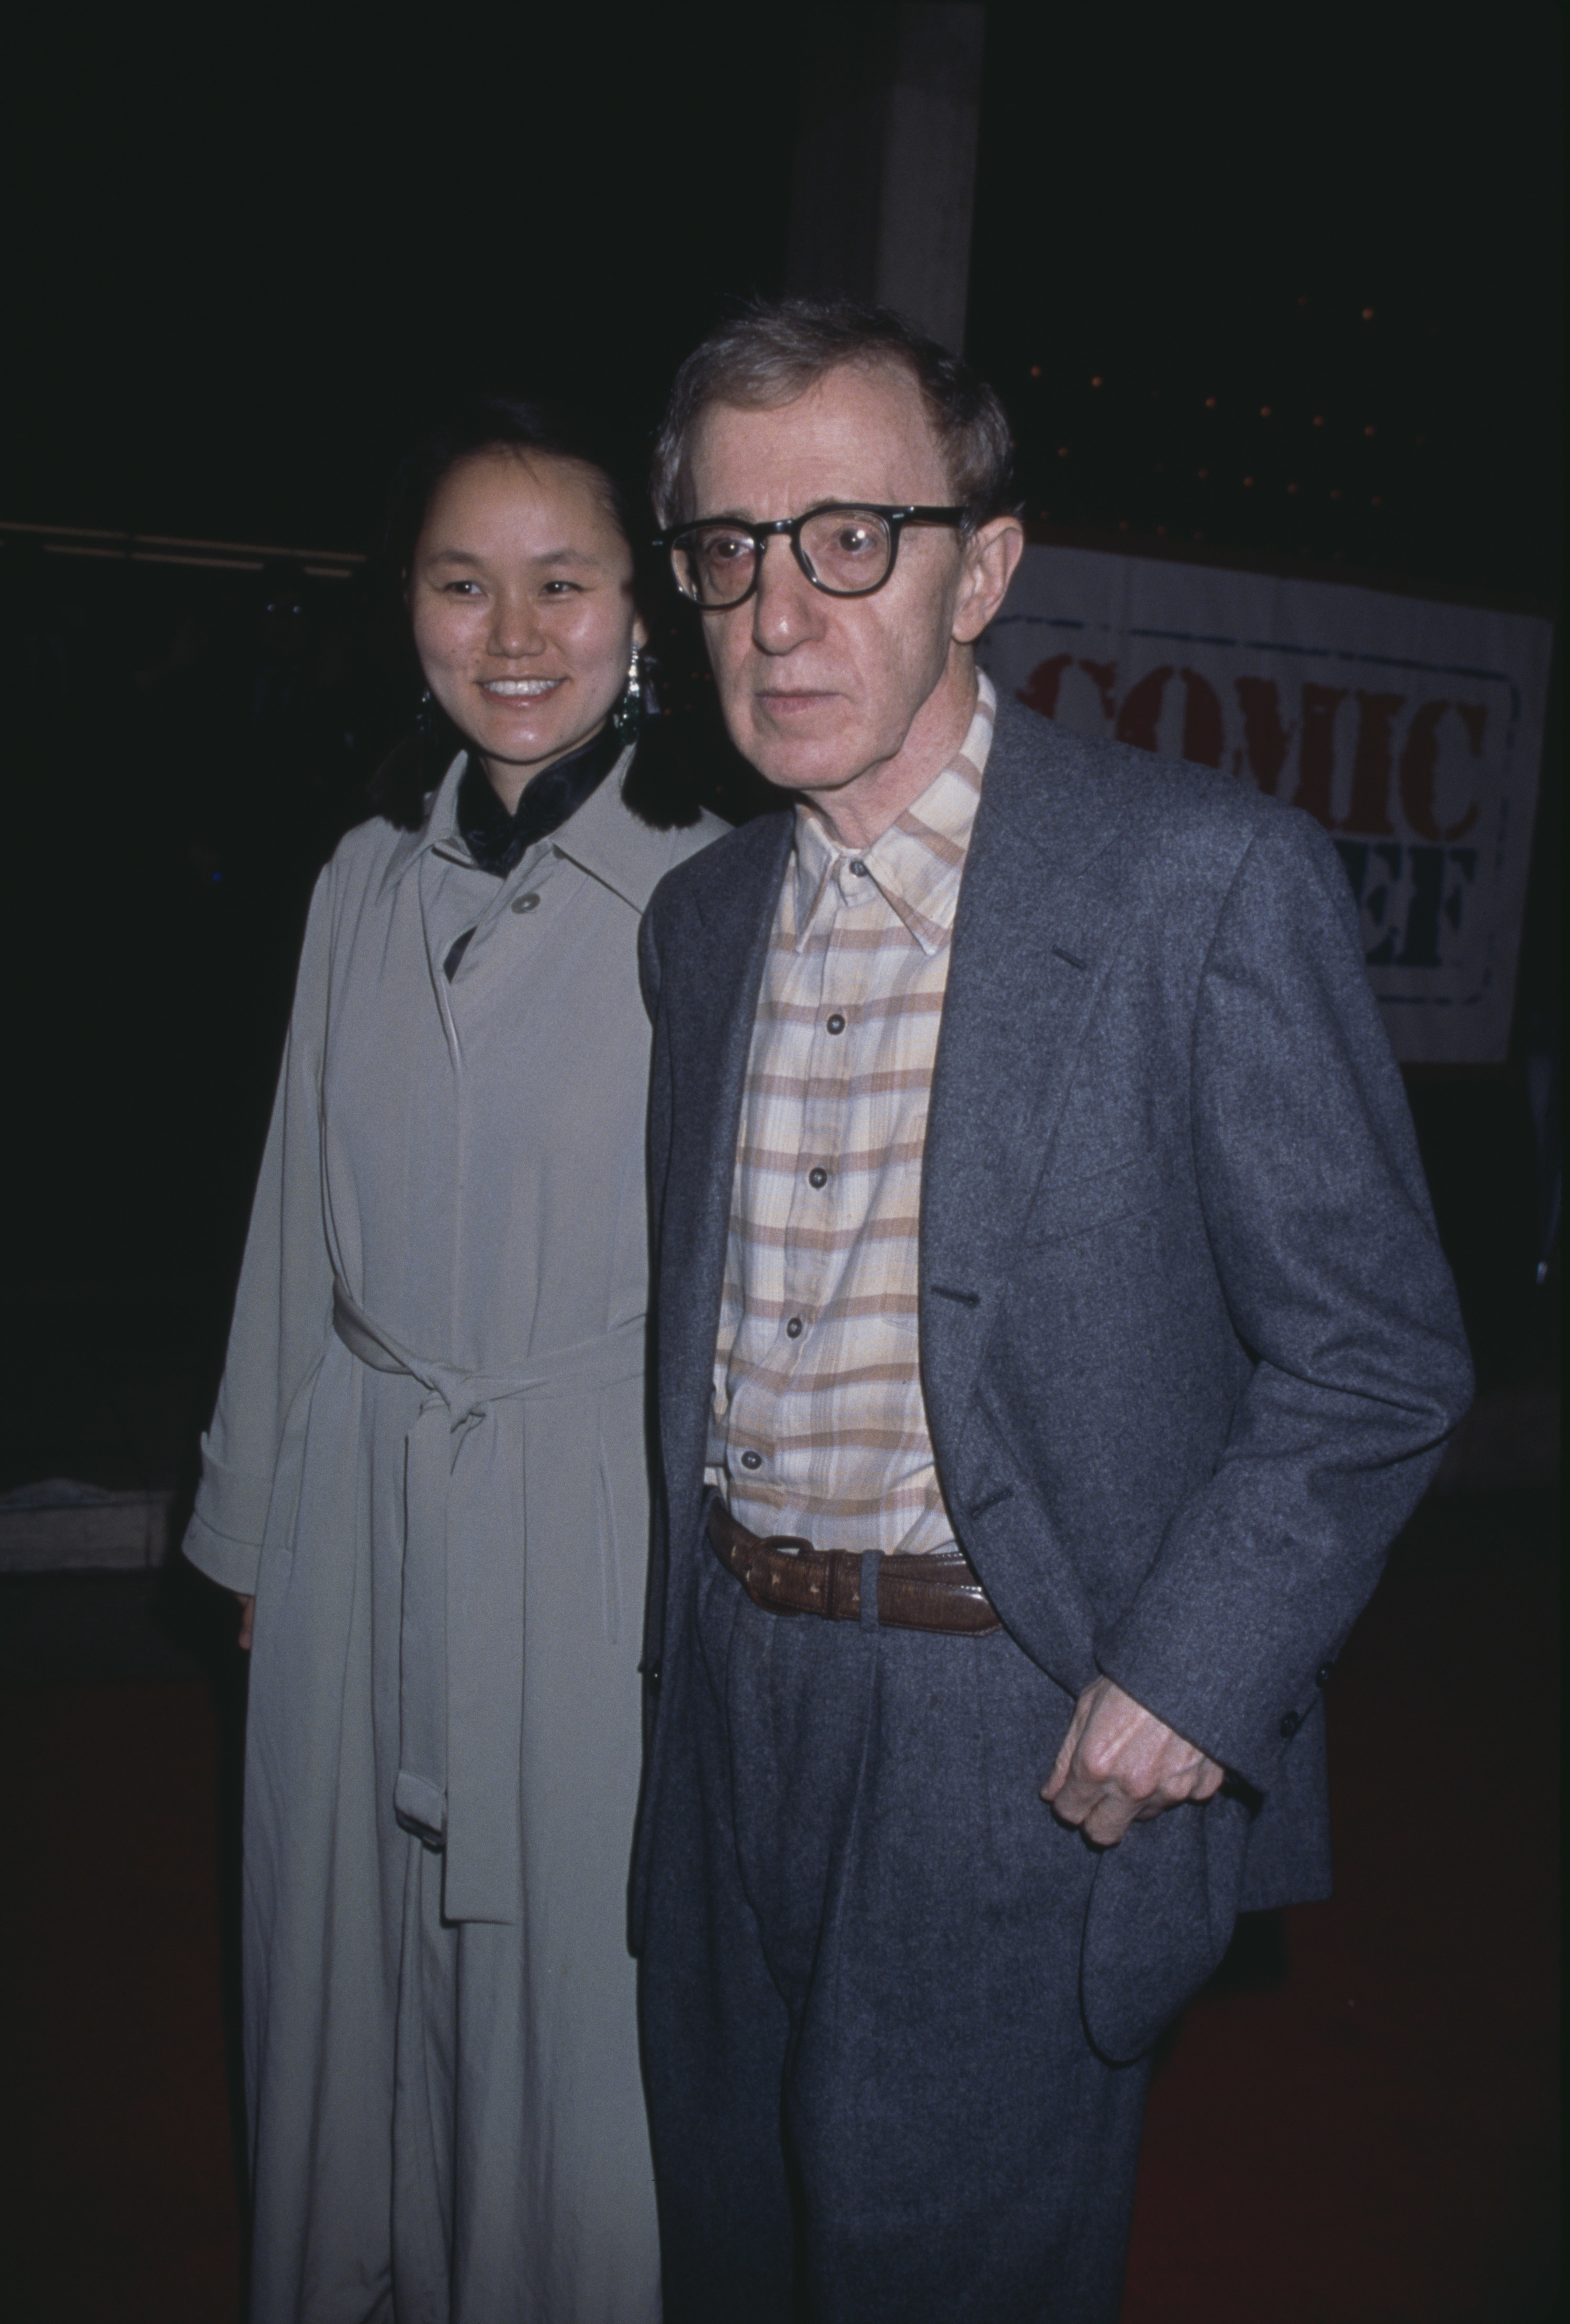 Woody Allen and Soon-Yi Previn at the premiere of &#x27;Deconstructing Harry&#x27; held in Los Angeles, California in 1997